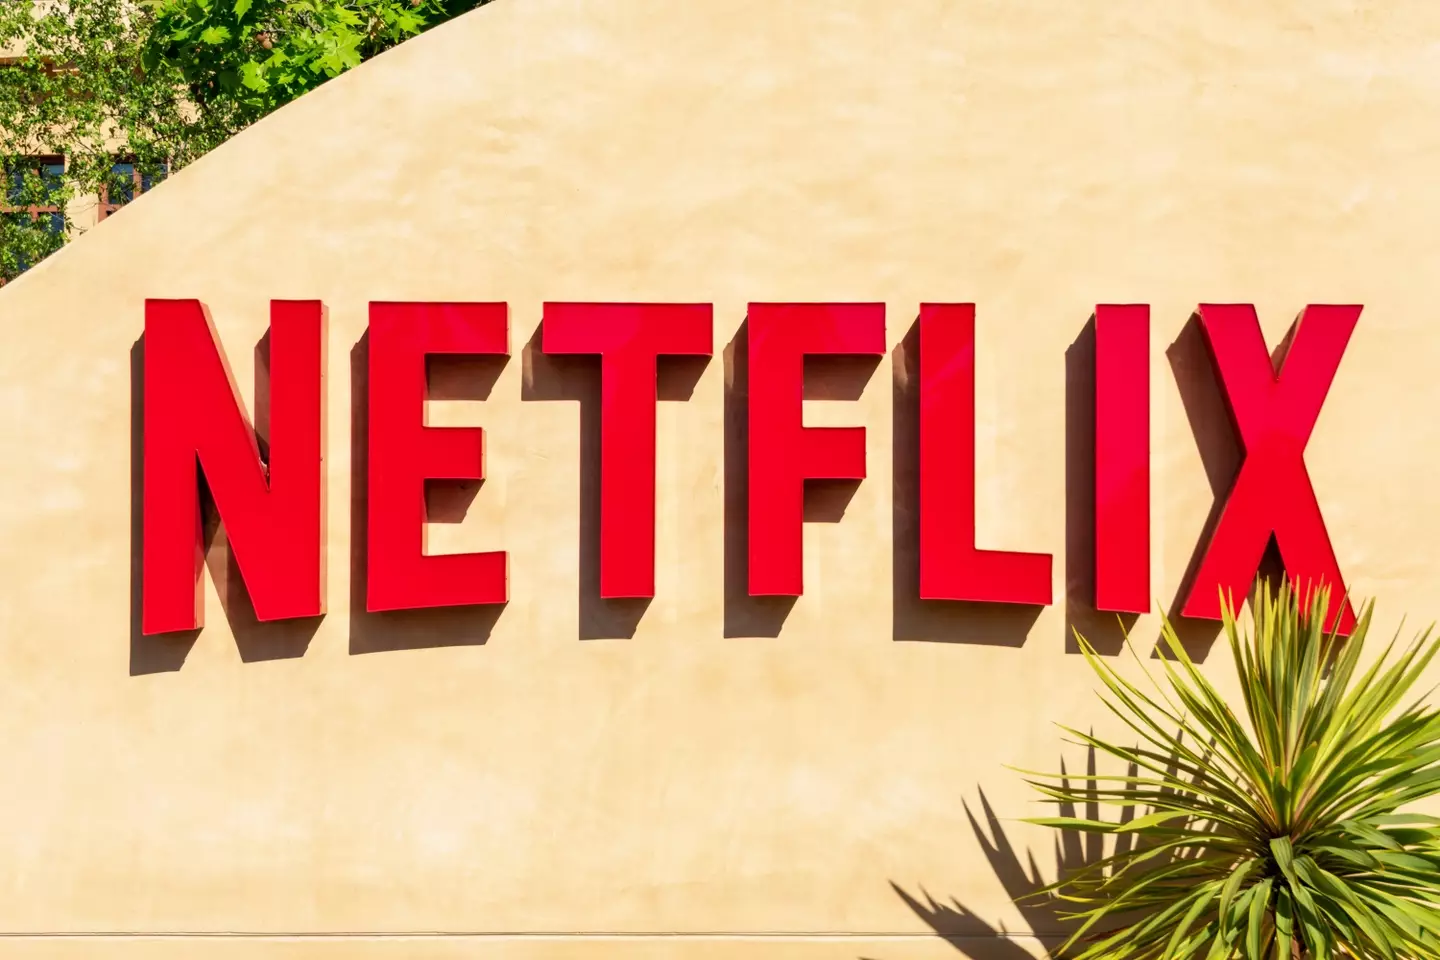 Netflix have been testing schemes to crack down on password sharing and aim to roll out their plans next year.